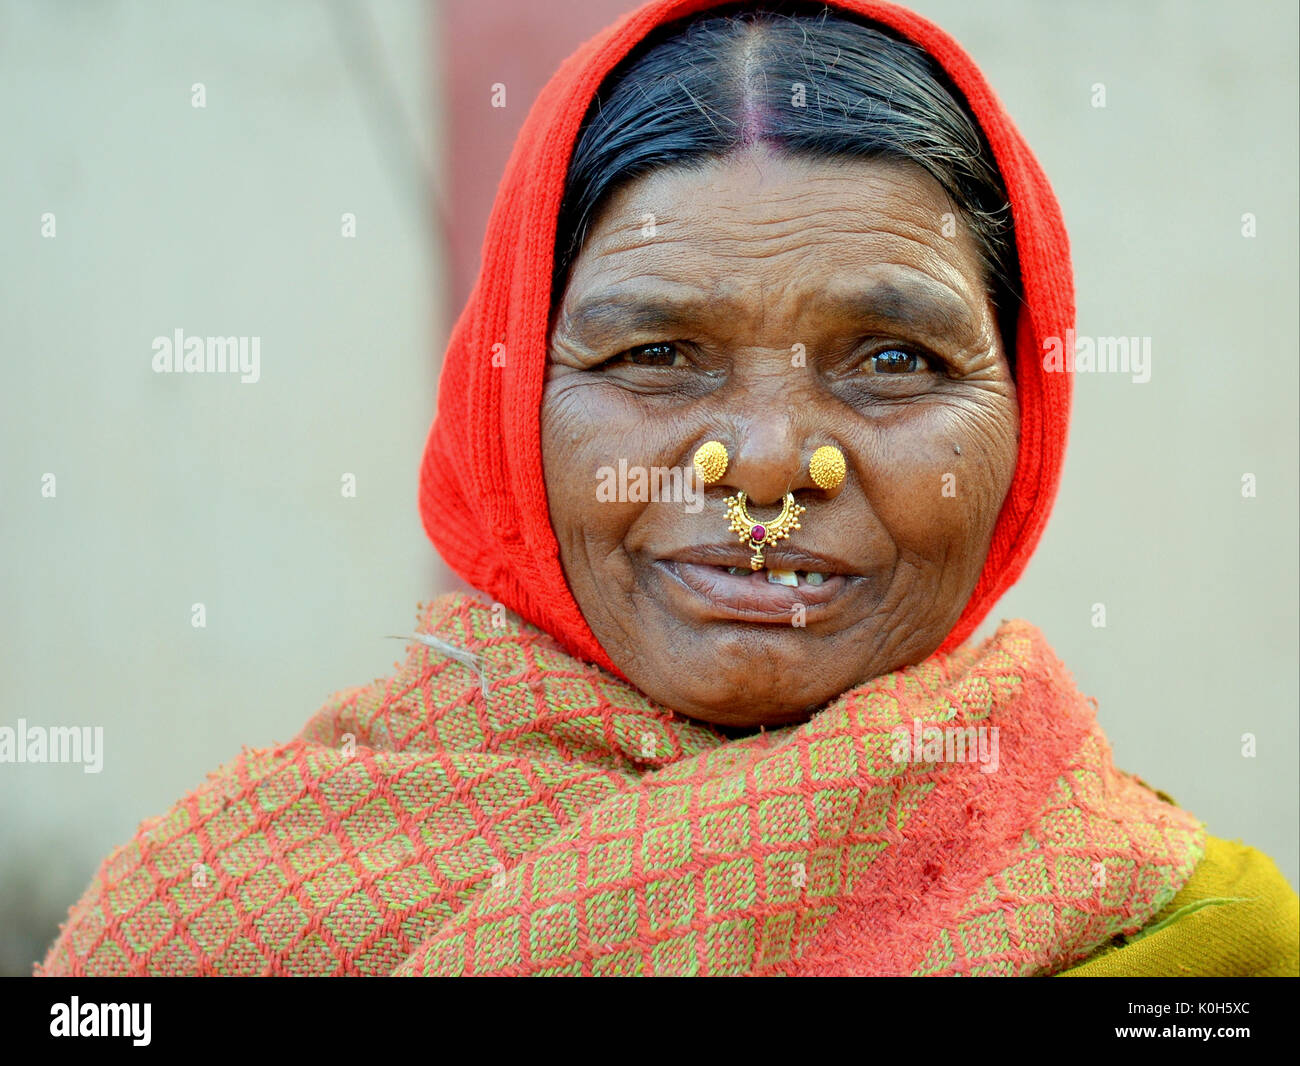 Elderly Indian Adivasi woman with two golden nose studs and gold-and-gemstone nose jewellery wears a red headscarf and smiles for the camera. Stock Photo